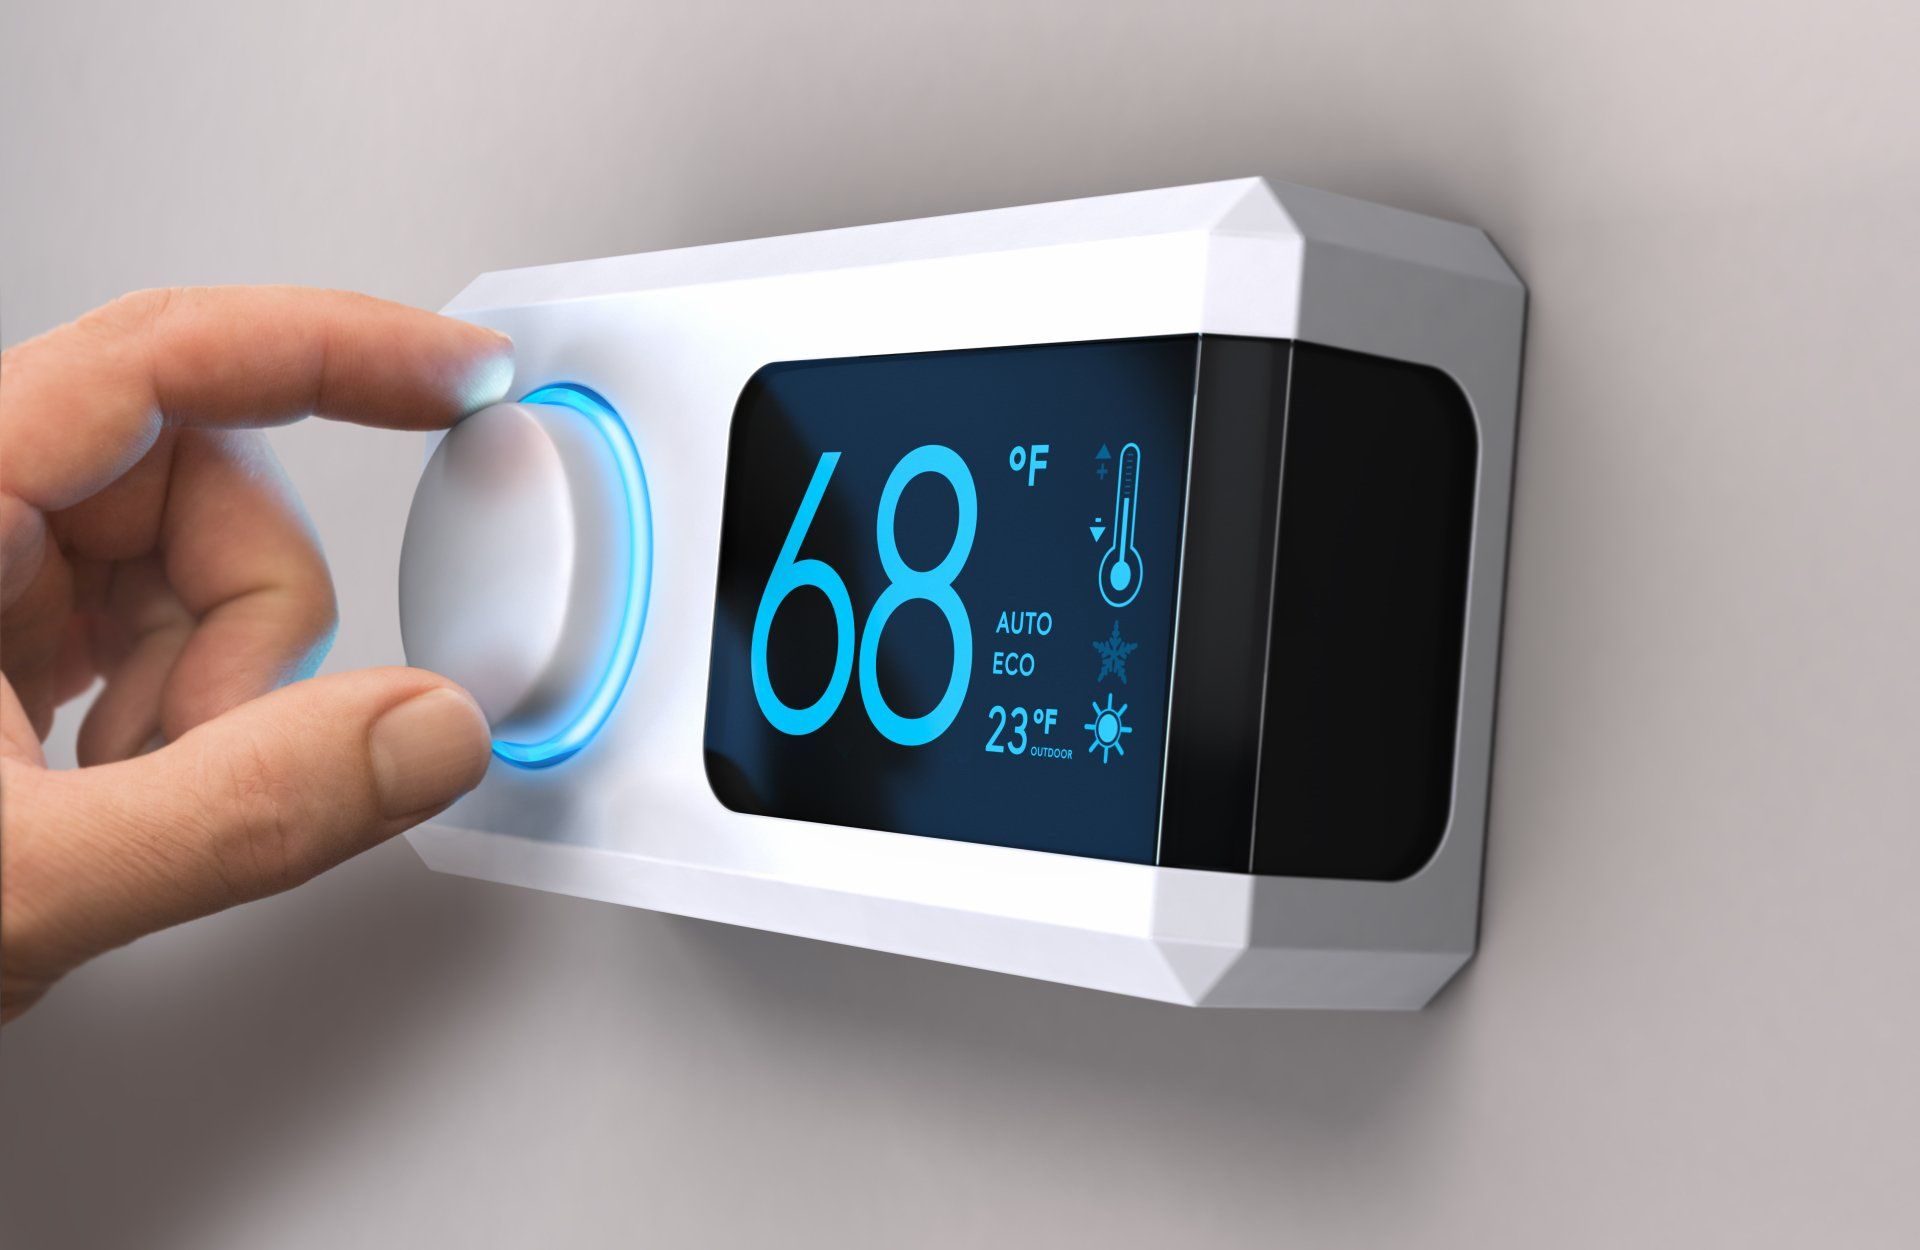 Home or Residential Thermostats with Smart Technology